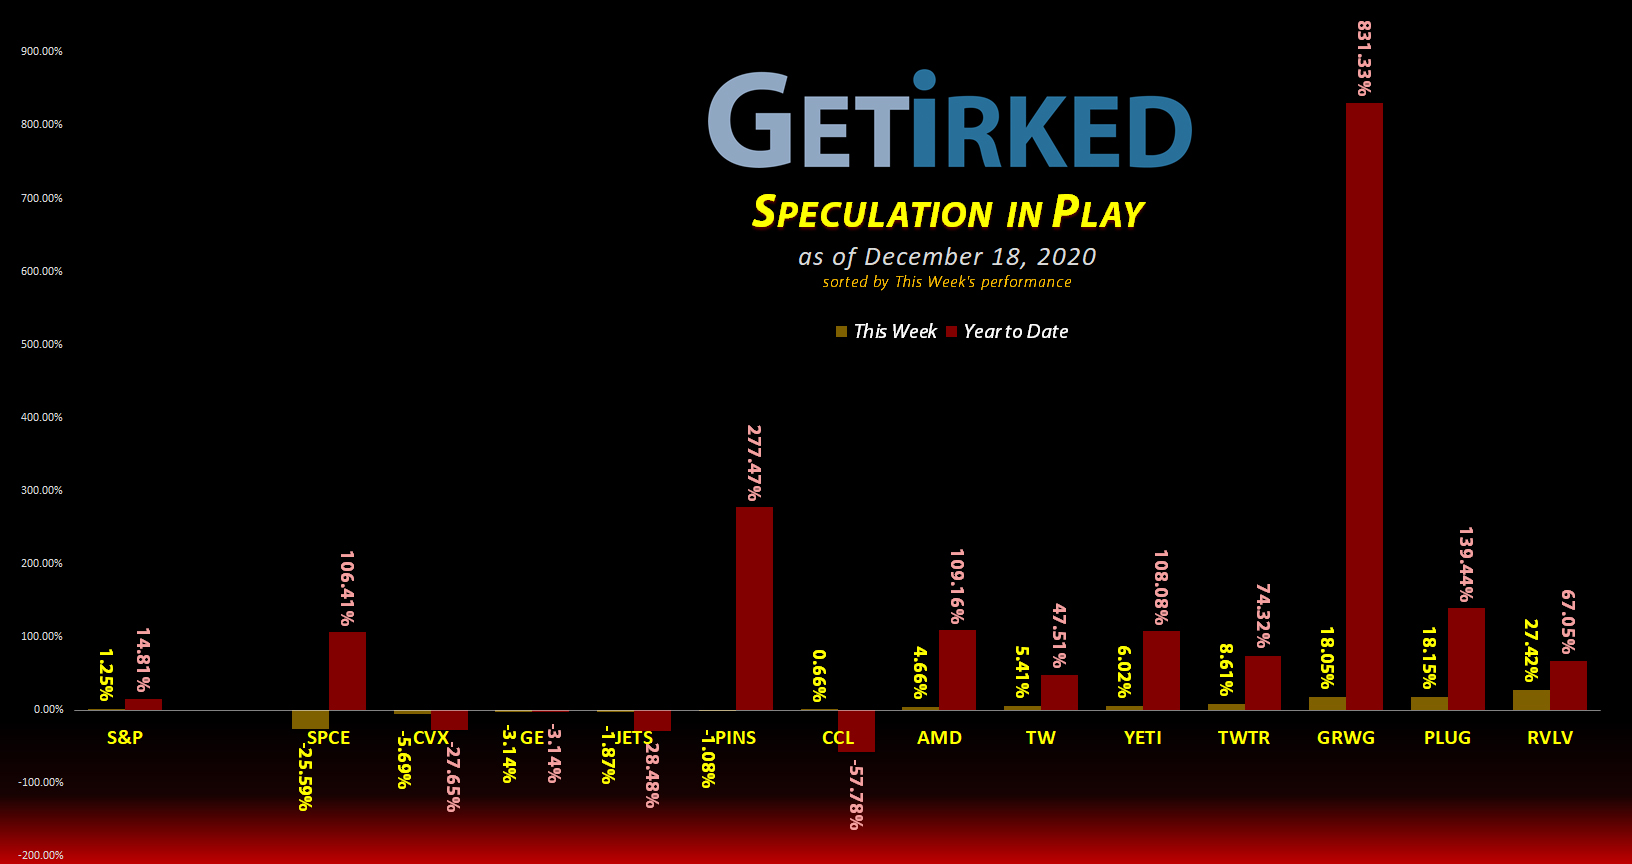 Get Irked's Speculation in Play - December 18, 2020